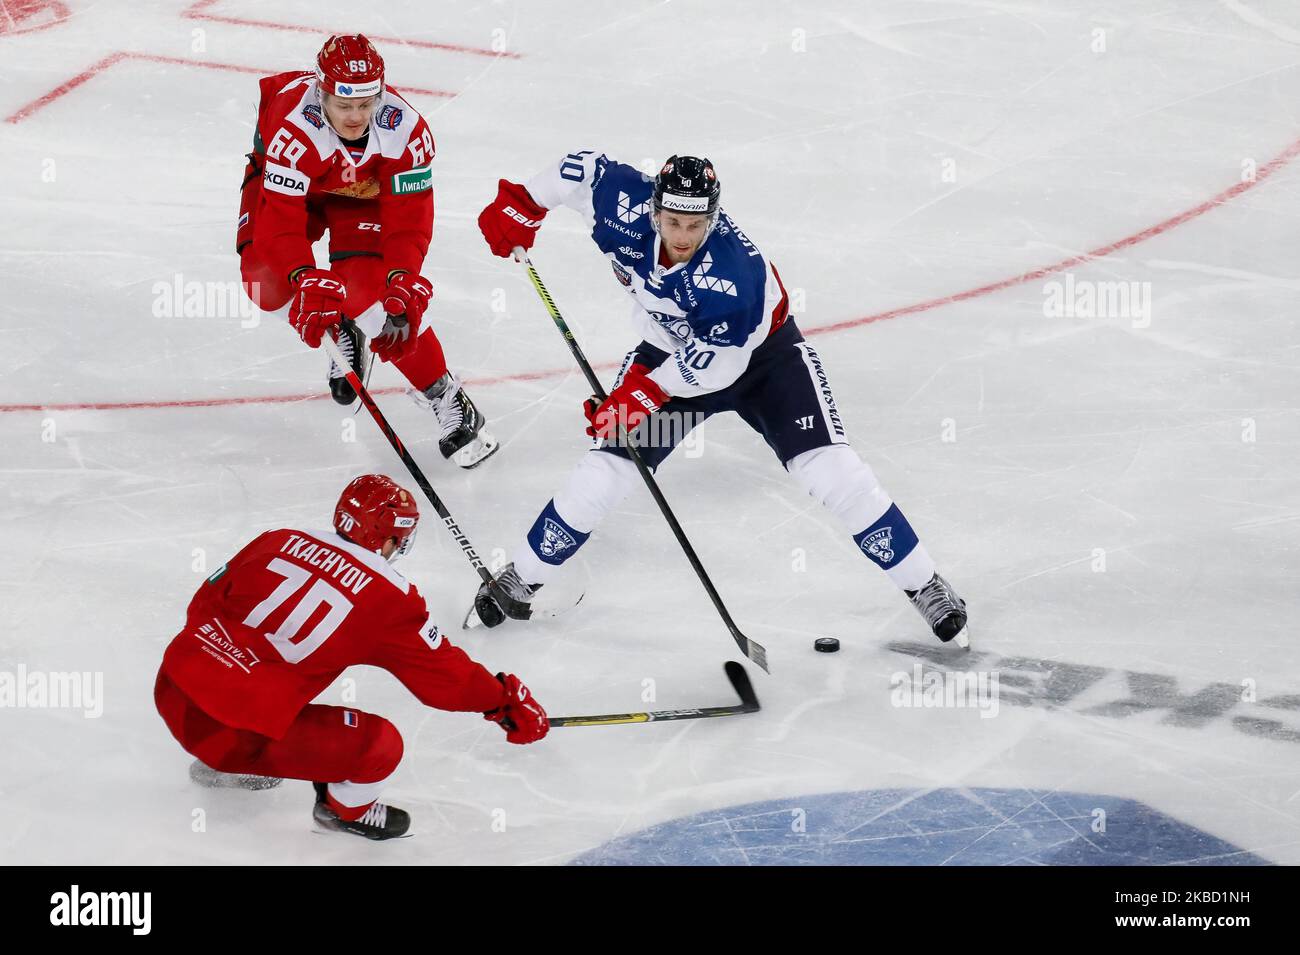 Nikita Lyamkin (69) and Vladimir A. Tkachyov (70) of Russia in action against Petteri Lindbohm of Finland during the Euro Hockey Tour Channel One Cup ice hockey match between Russia and Finland on December 15, 2019 at Gazprom Arena in Saint Petersburg, Russia. (Photo by Mike Kireev/NurPhoto) Stock Photo